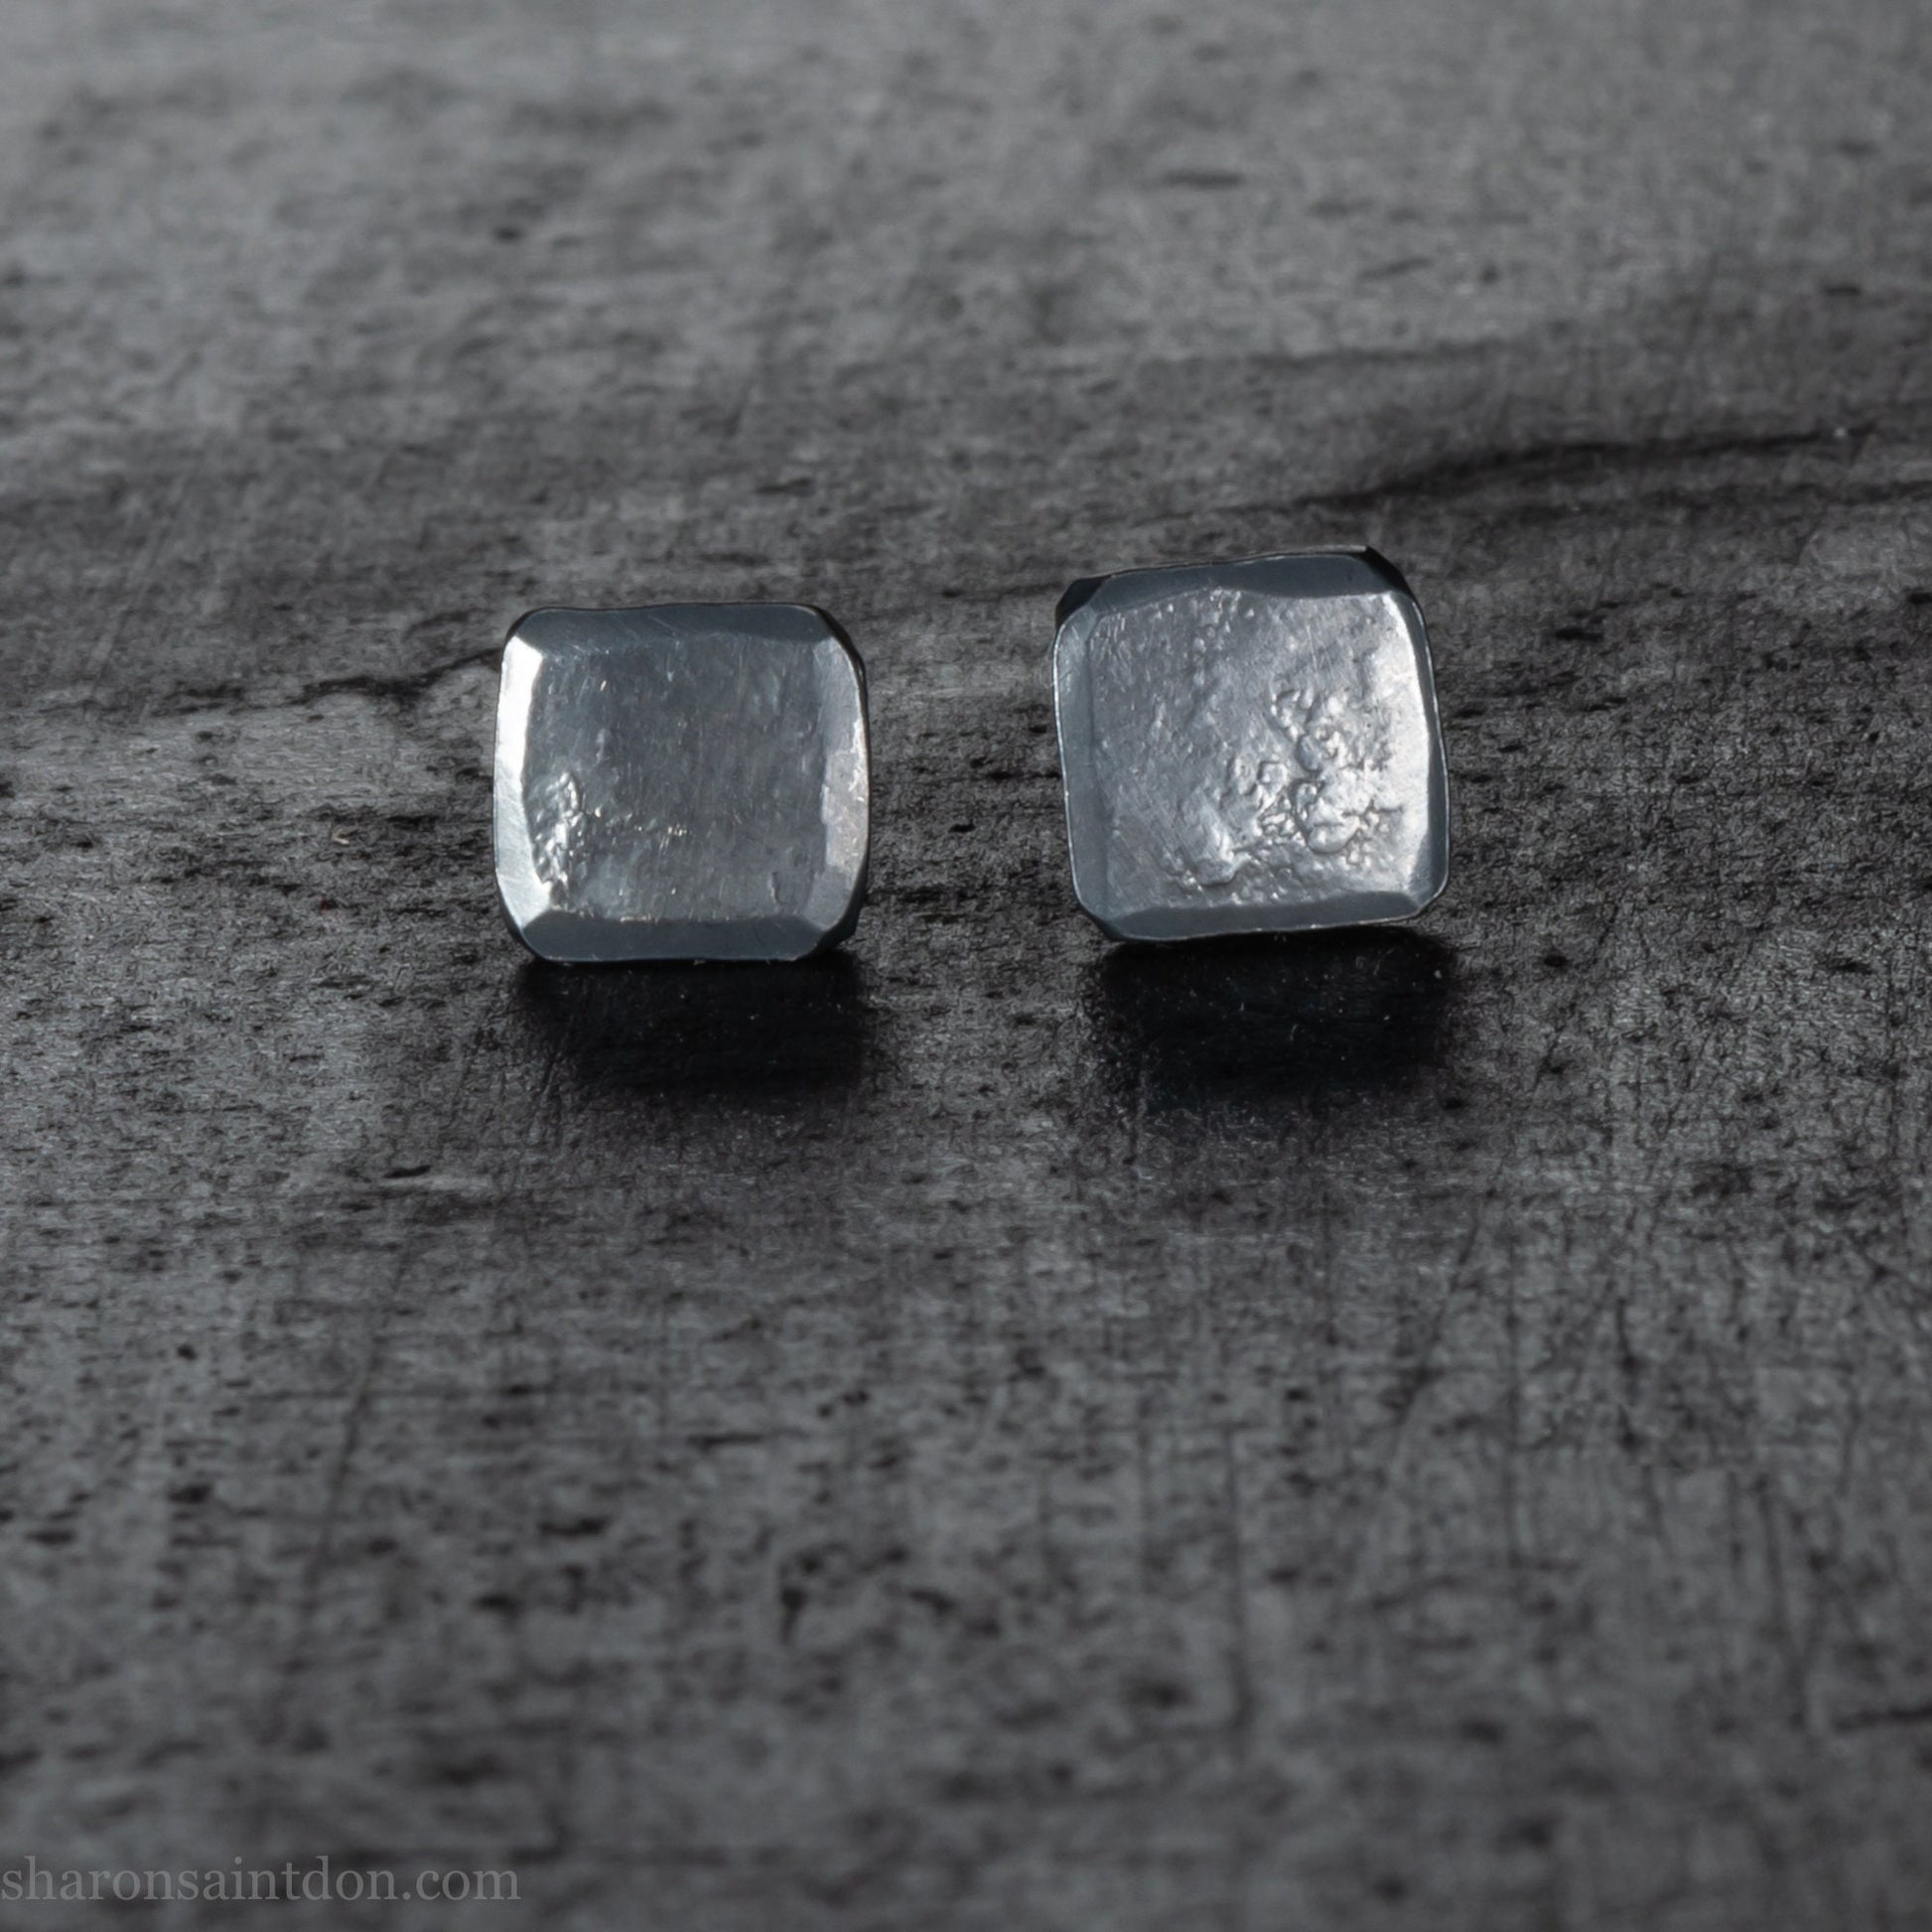 Handmade 925 sterling silver stud earrings.  Small hammered, textured squares. Minimalist, oxidized black stud earrings for men or women made by Sharon SaintDon in North America.